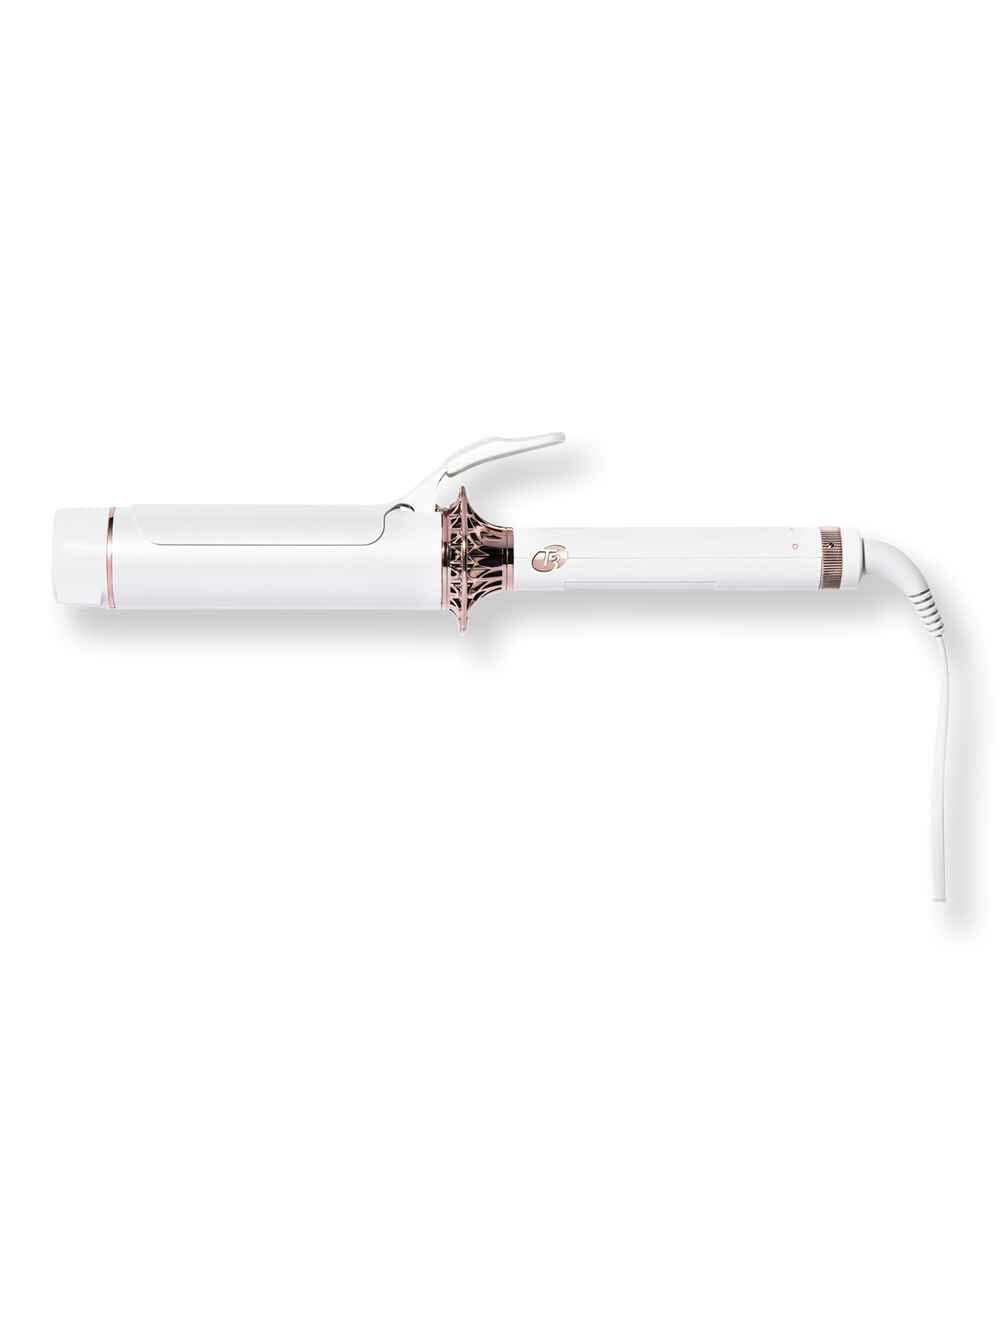 T3 Micro T3 Micro BodyWaver White & Rose Gold Hair Dryers & Styling Tools 